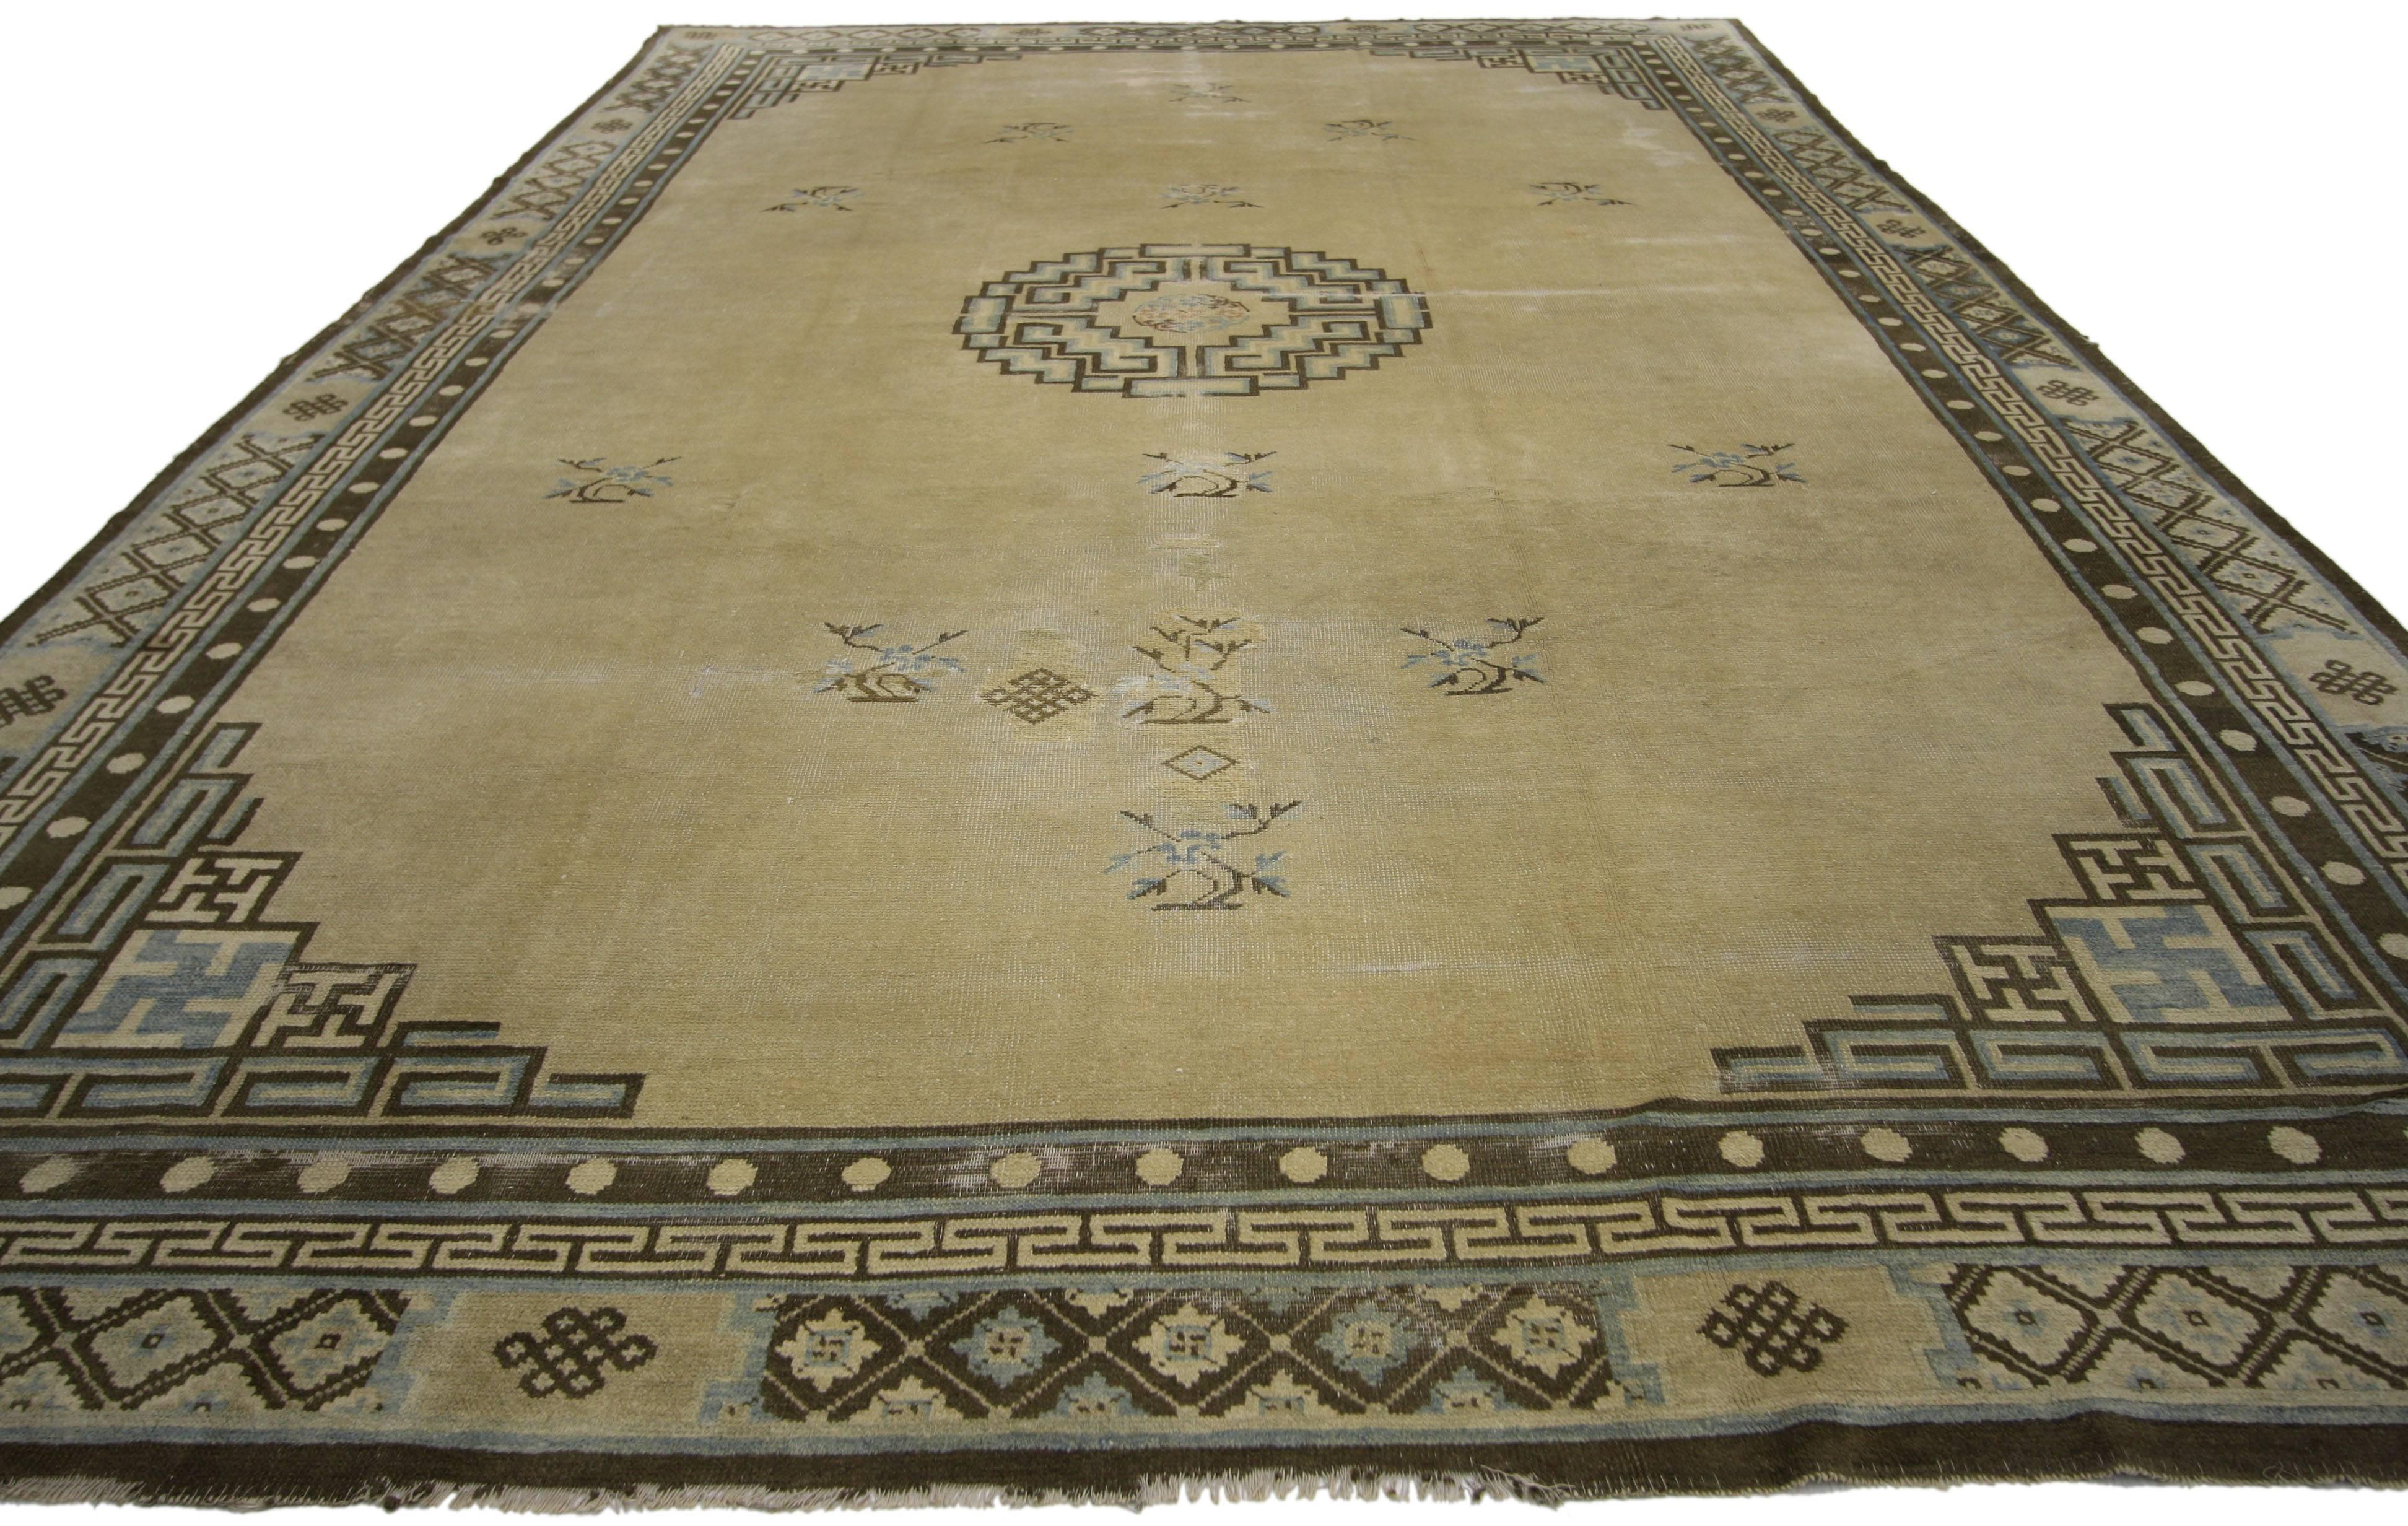 74038 Antique Chinese Peking Rug with Art Deco Style 07'04 x 11'08. This antique Chinese Peking rug features Art Deco style with an elaborate center medallion placed in an open field with complementary geometric spandrels reflecting Chinese